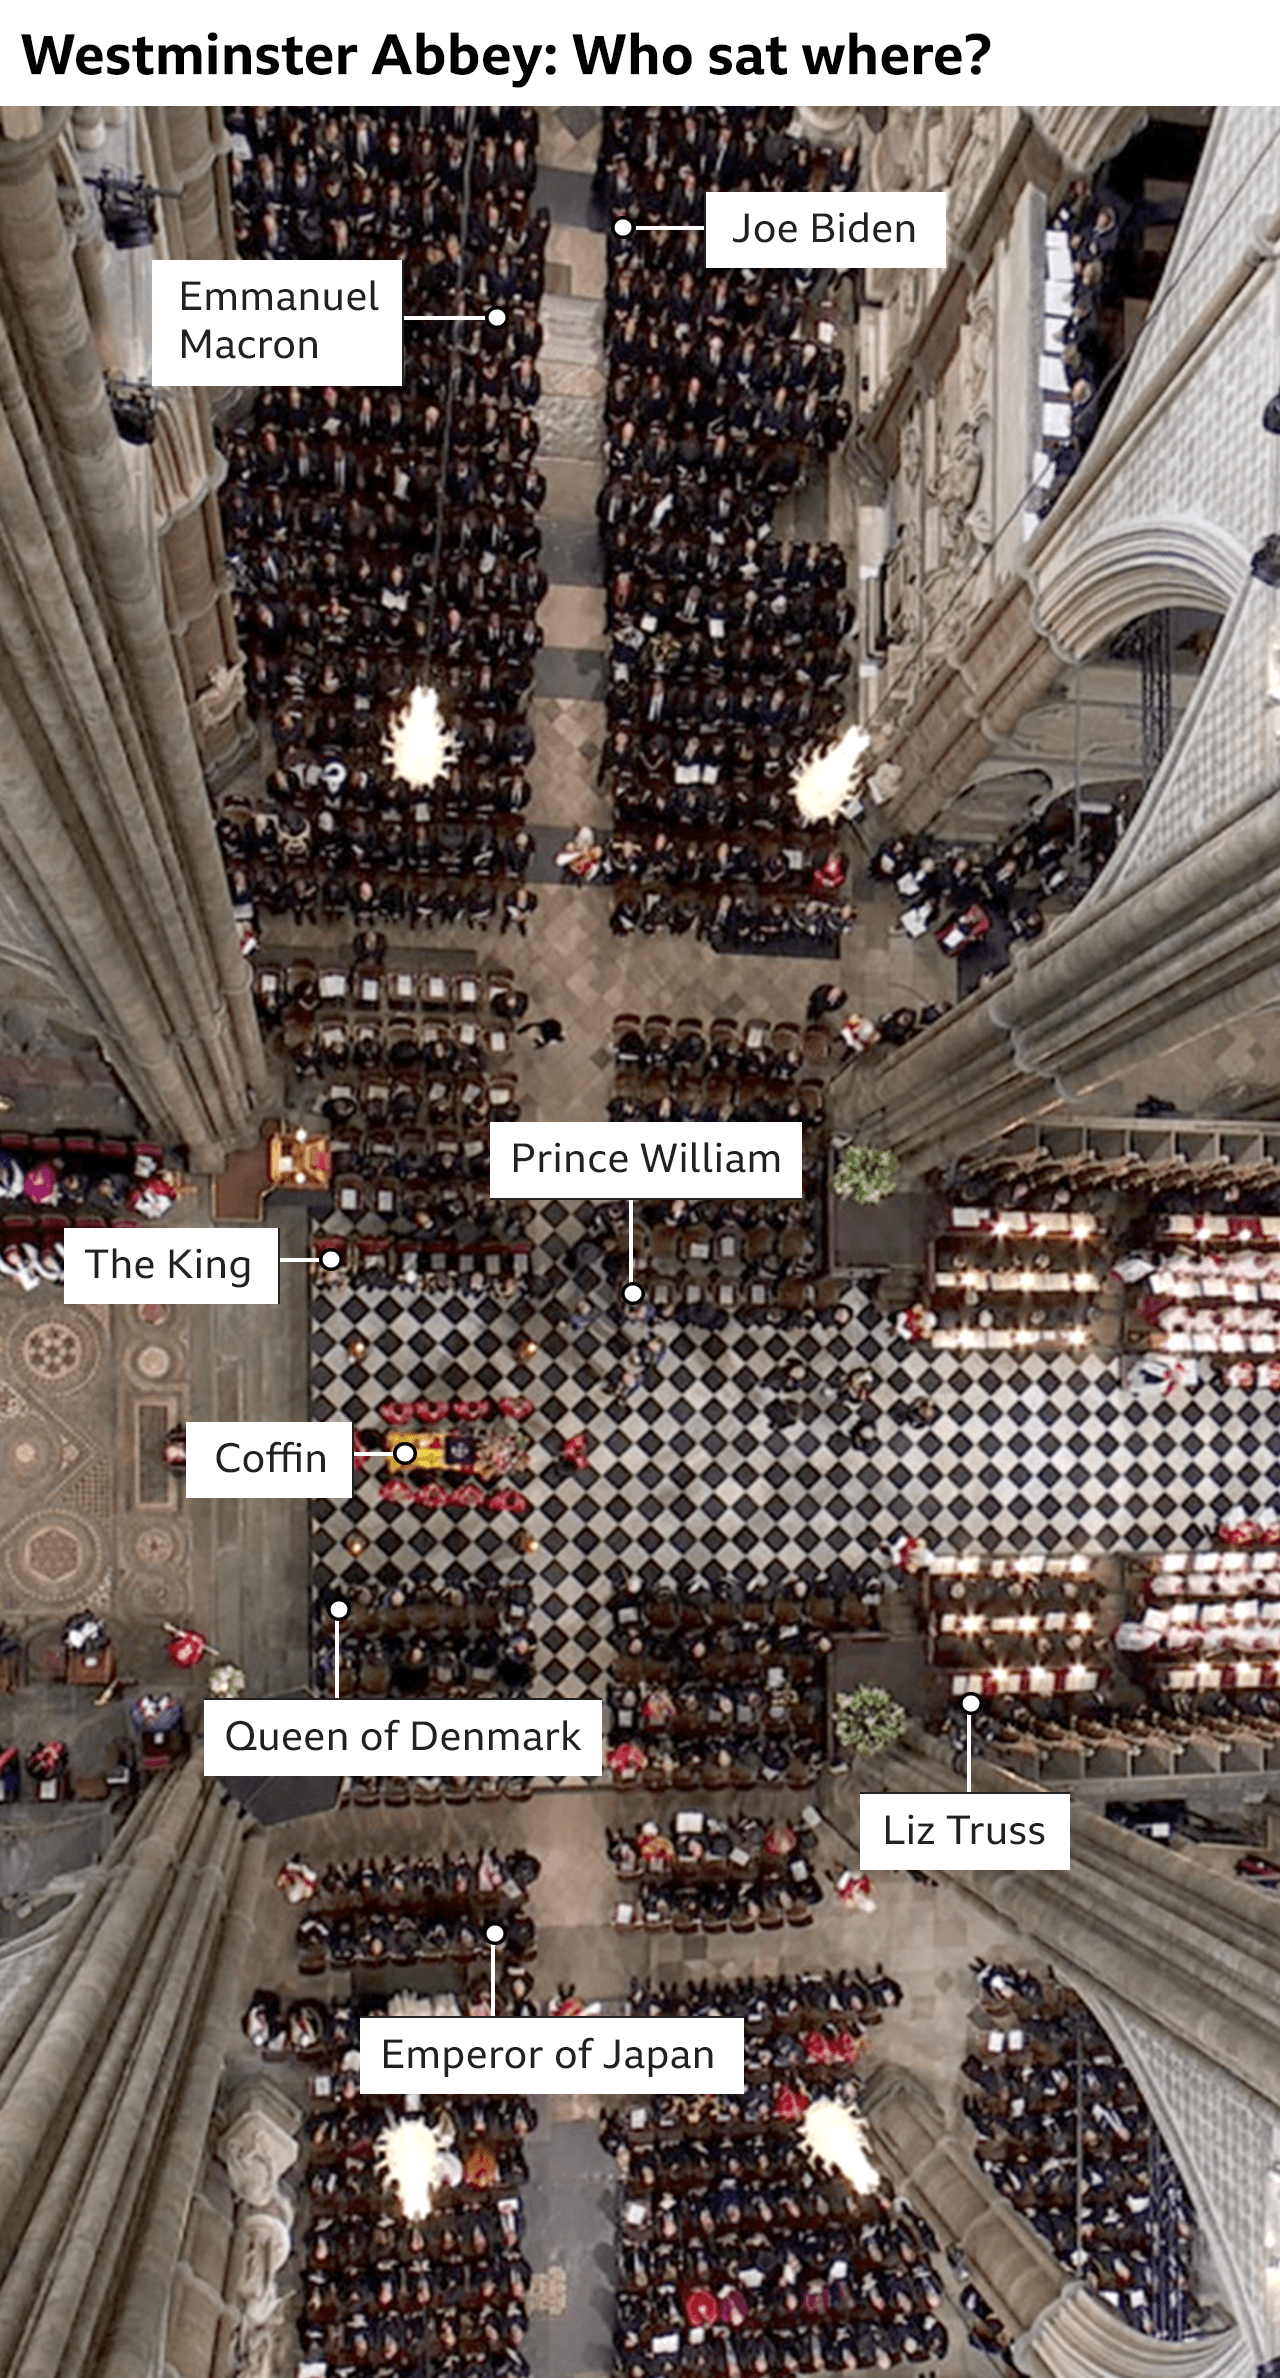 Aerial view of guests seated in the abbey